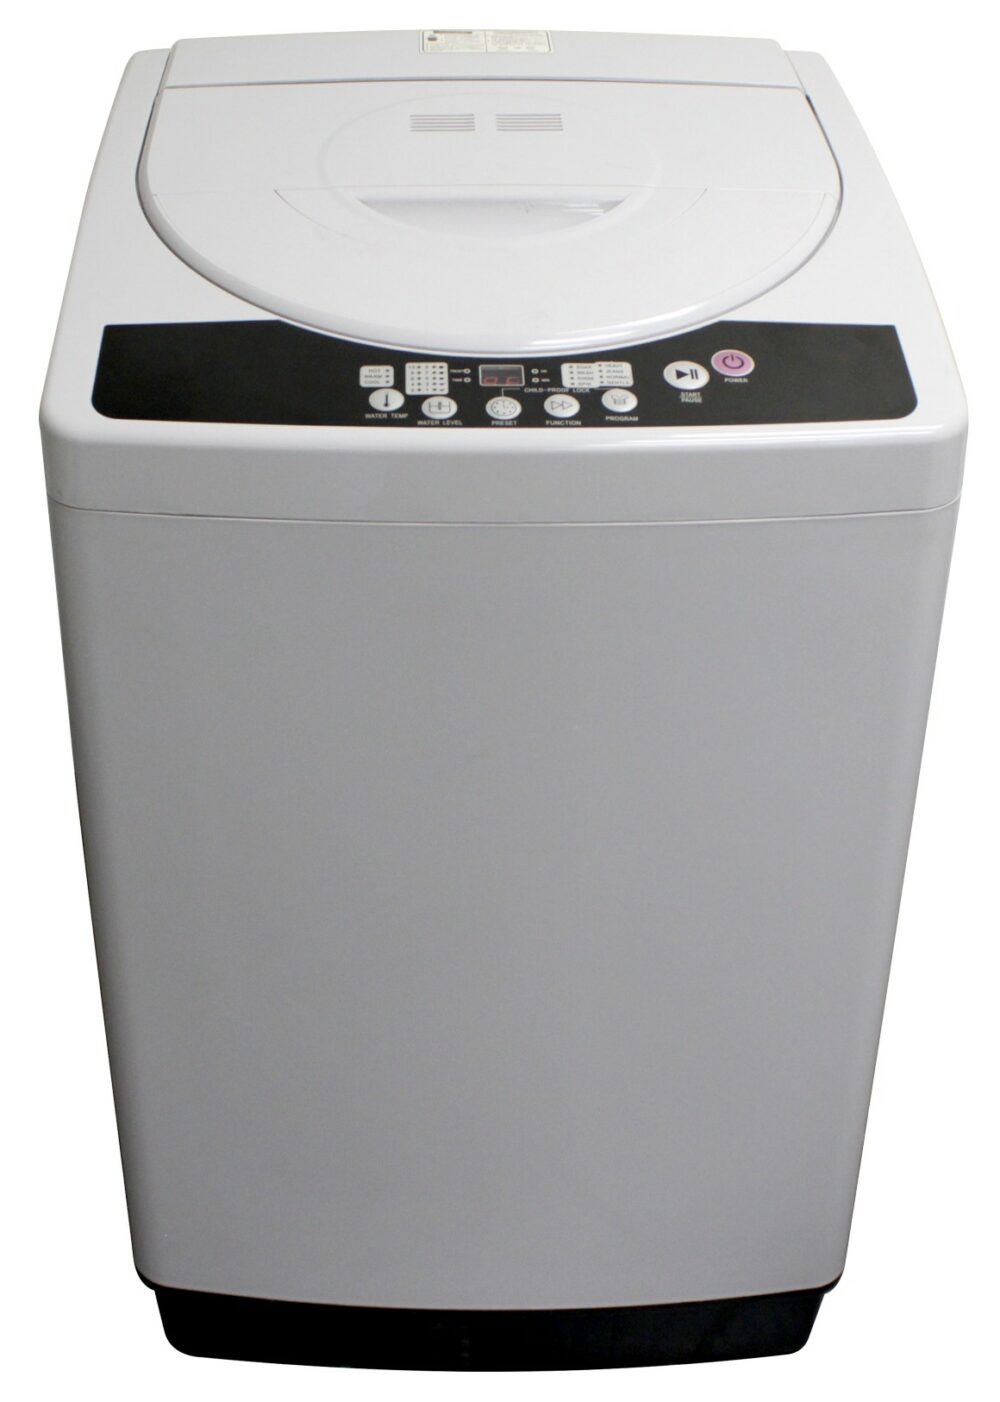 22615 - Apartment Size Portable Washer